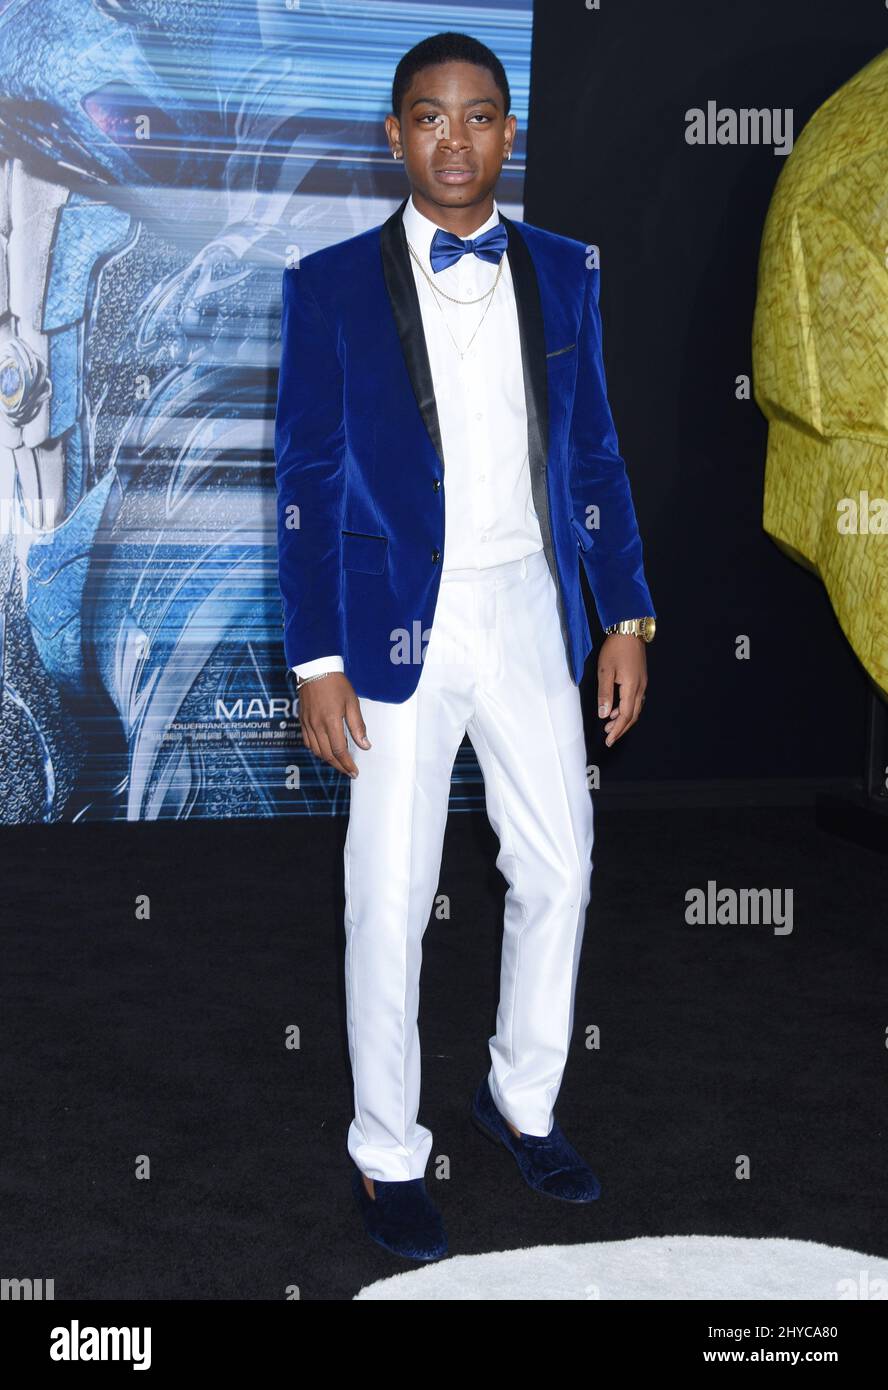 RJ Cyler attending the 'Saban's Power Rangers' World Premiere held at the Regency Village Theatre Stock Photo